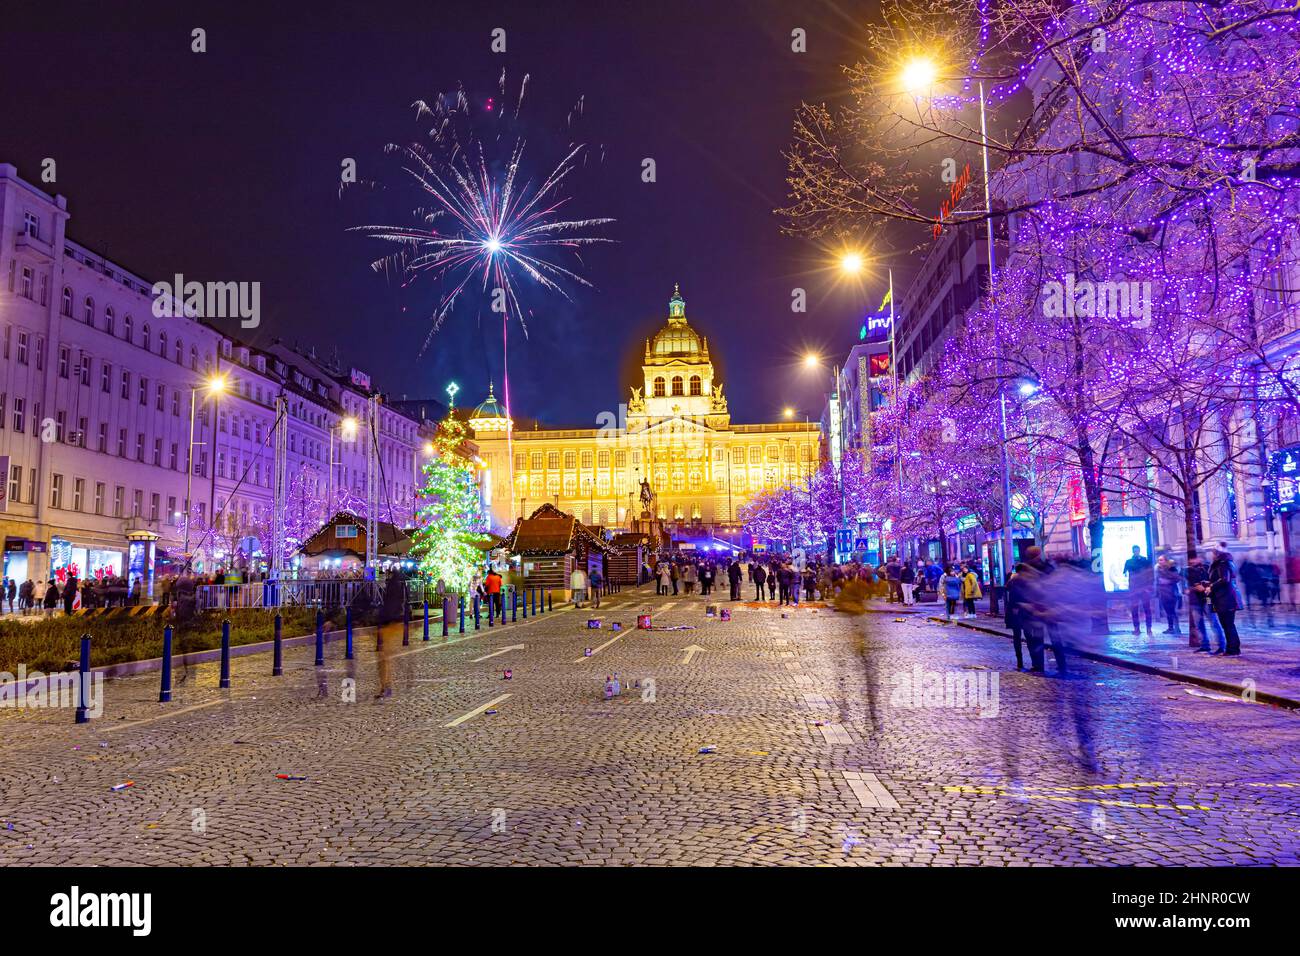 Prague, Czechia - January 1, 2010:  Large celebration of the New year 2019 on the main Prague square, the Wenceslas square. Hundreds of people were lunching fireworks and throwing firecrackers Stock Photo